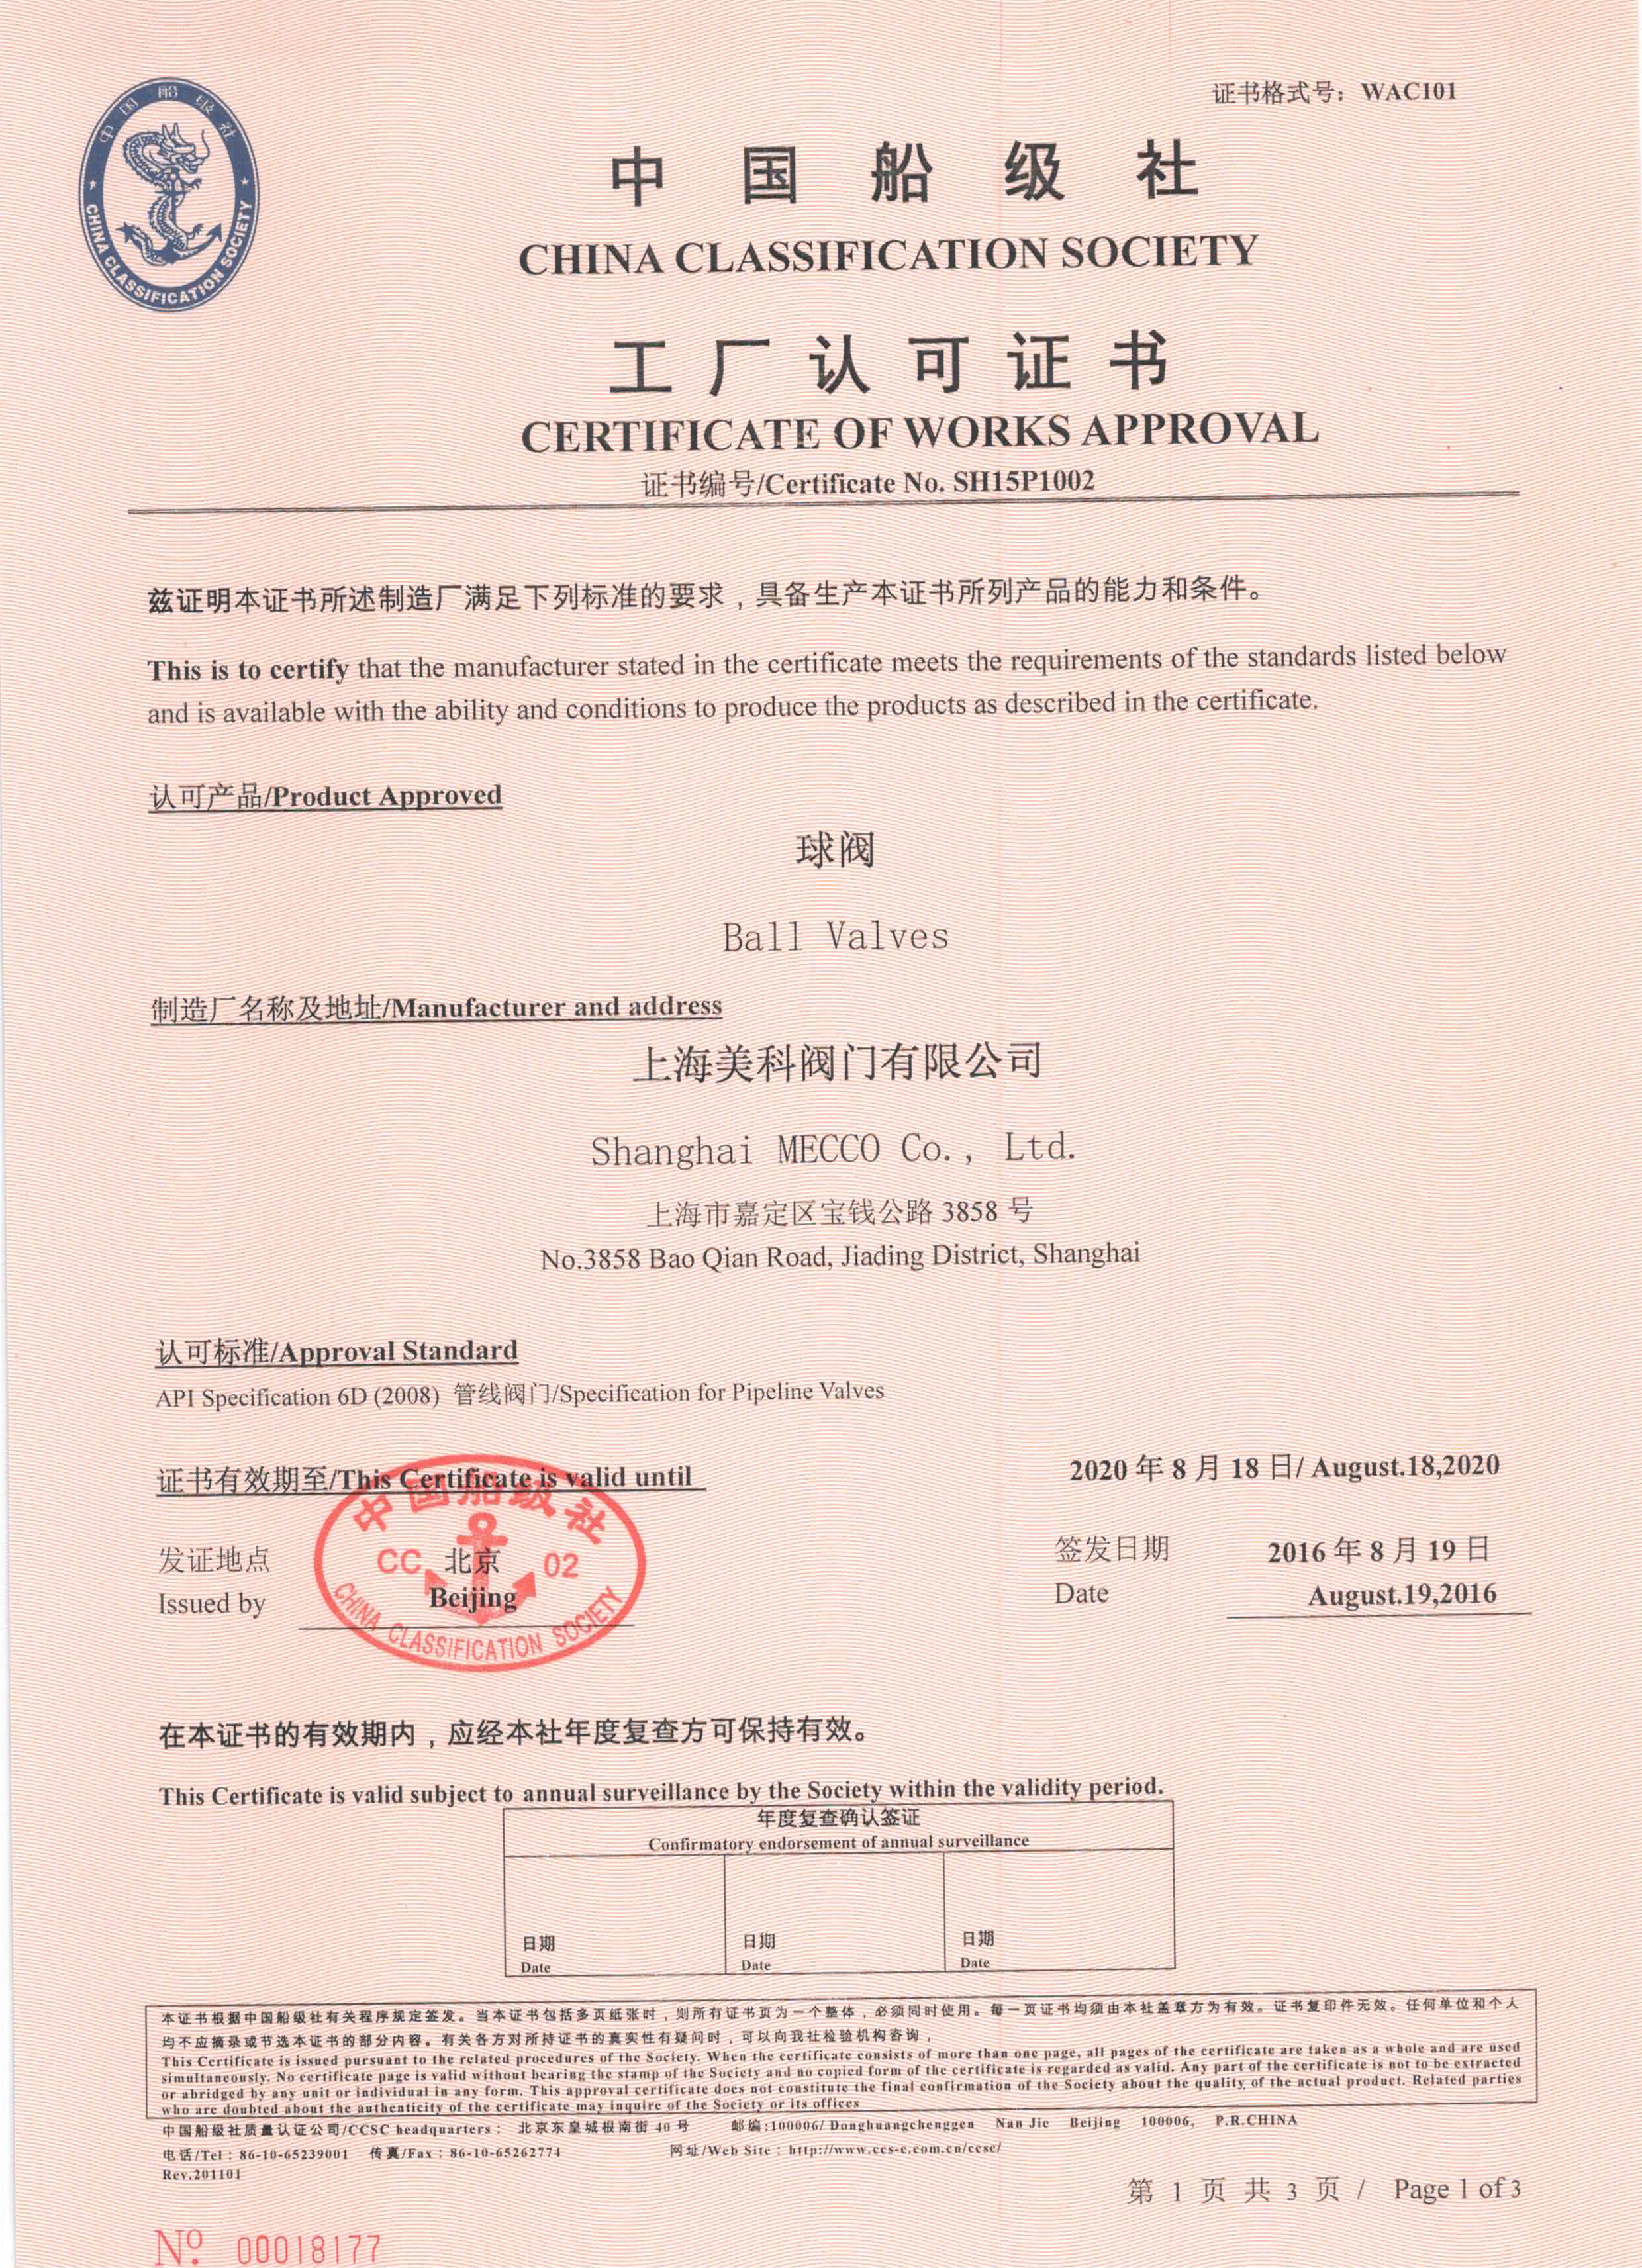 CCS Certificate of Works Approval